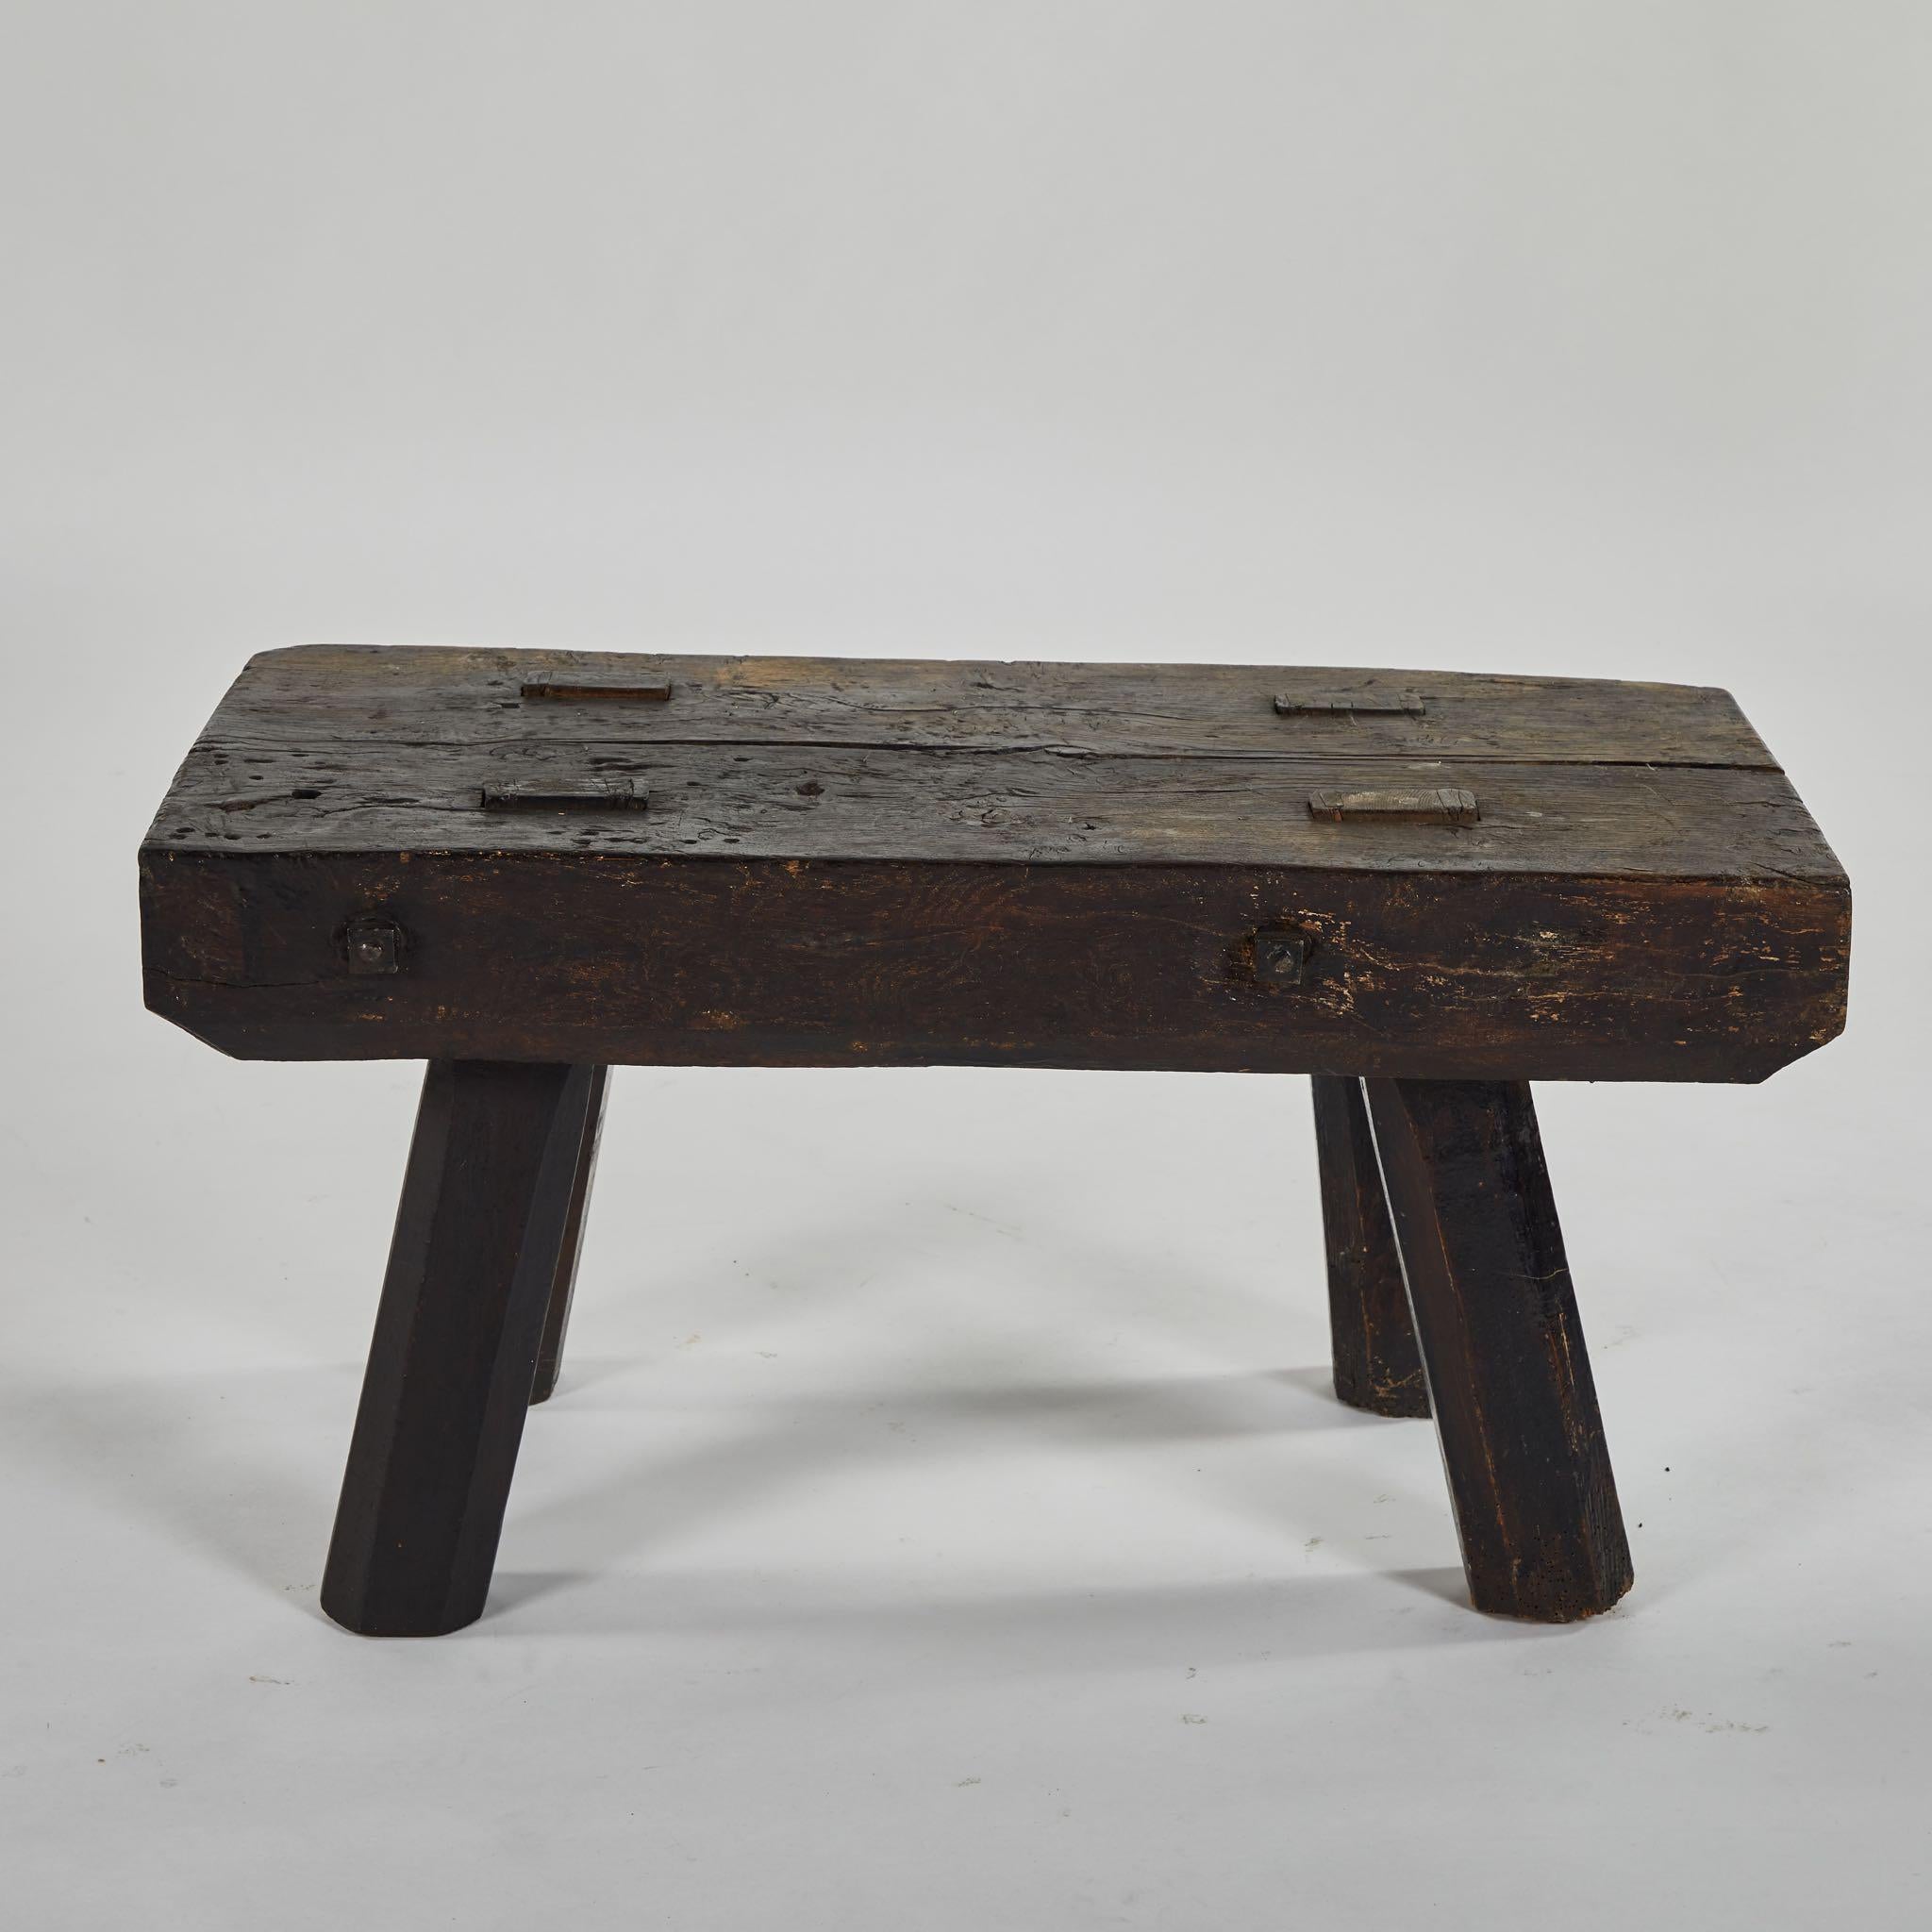 English Rustic Bench or Coffee Table